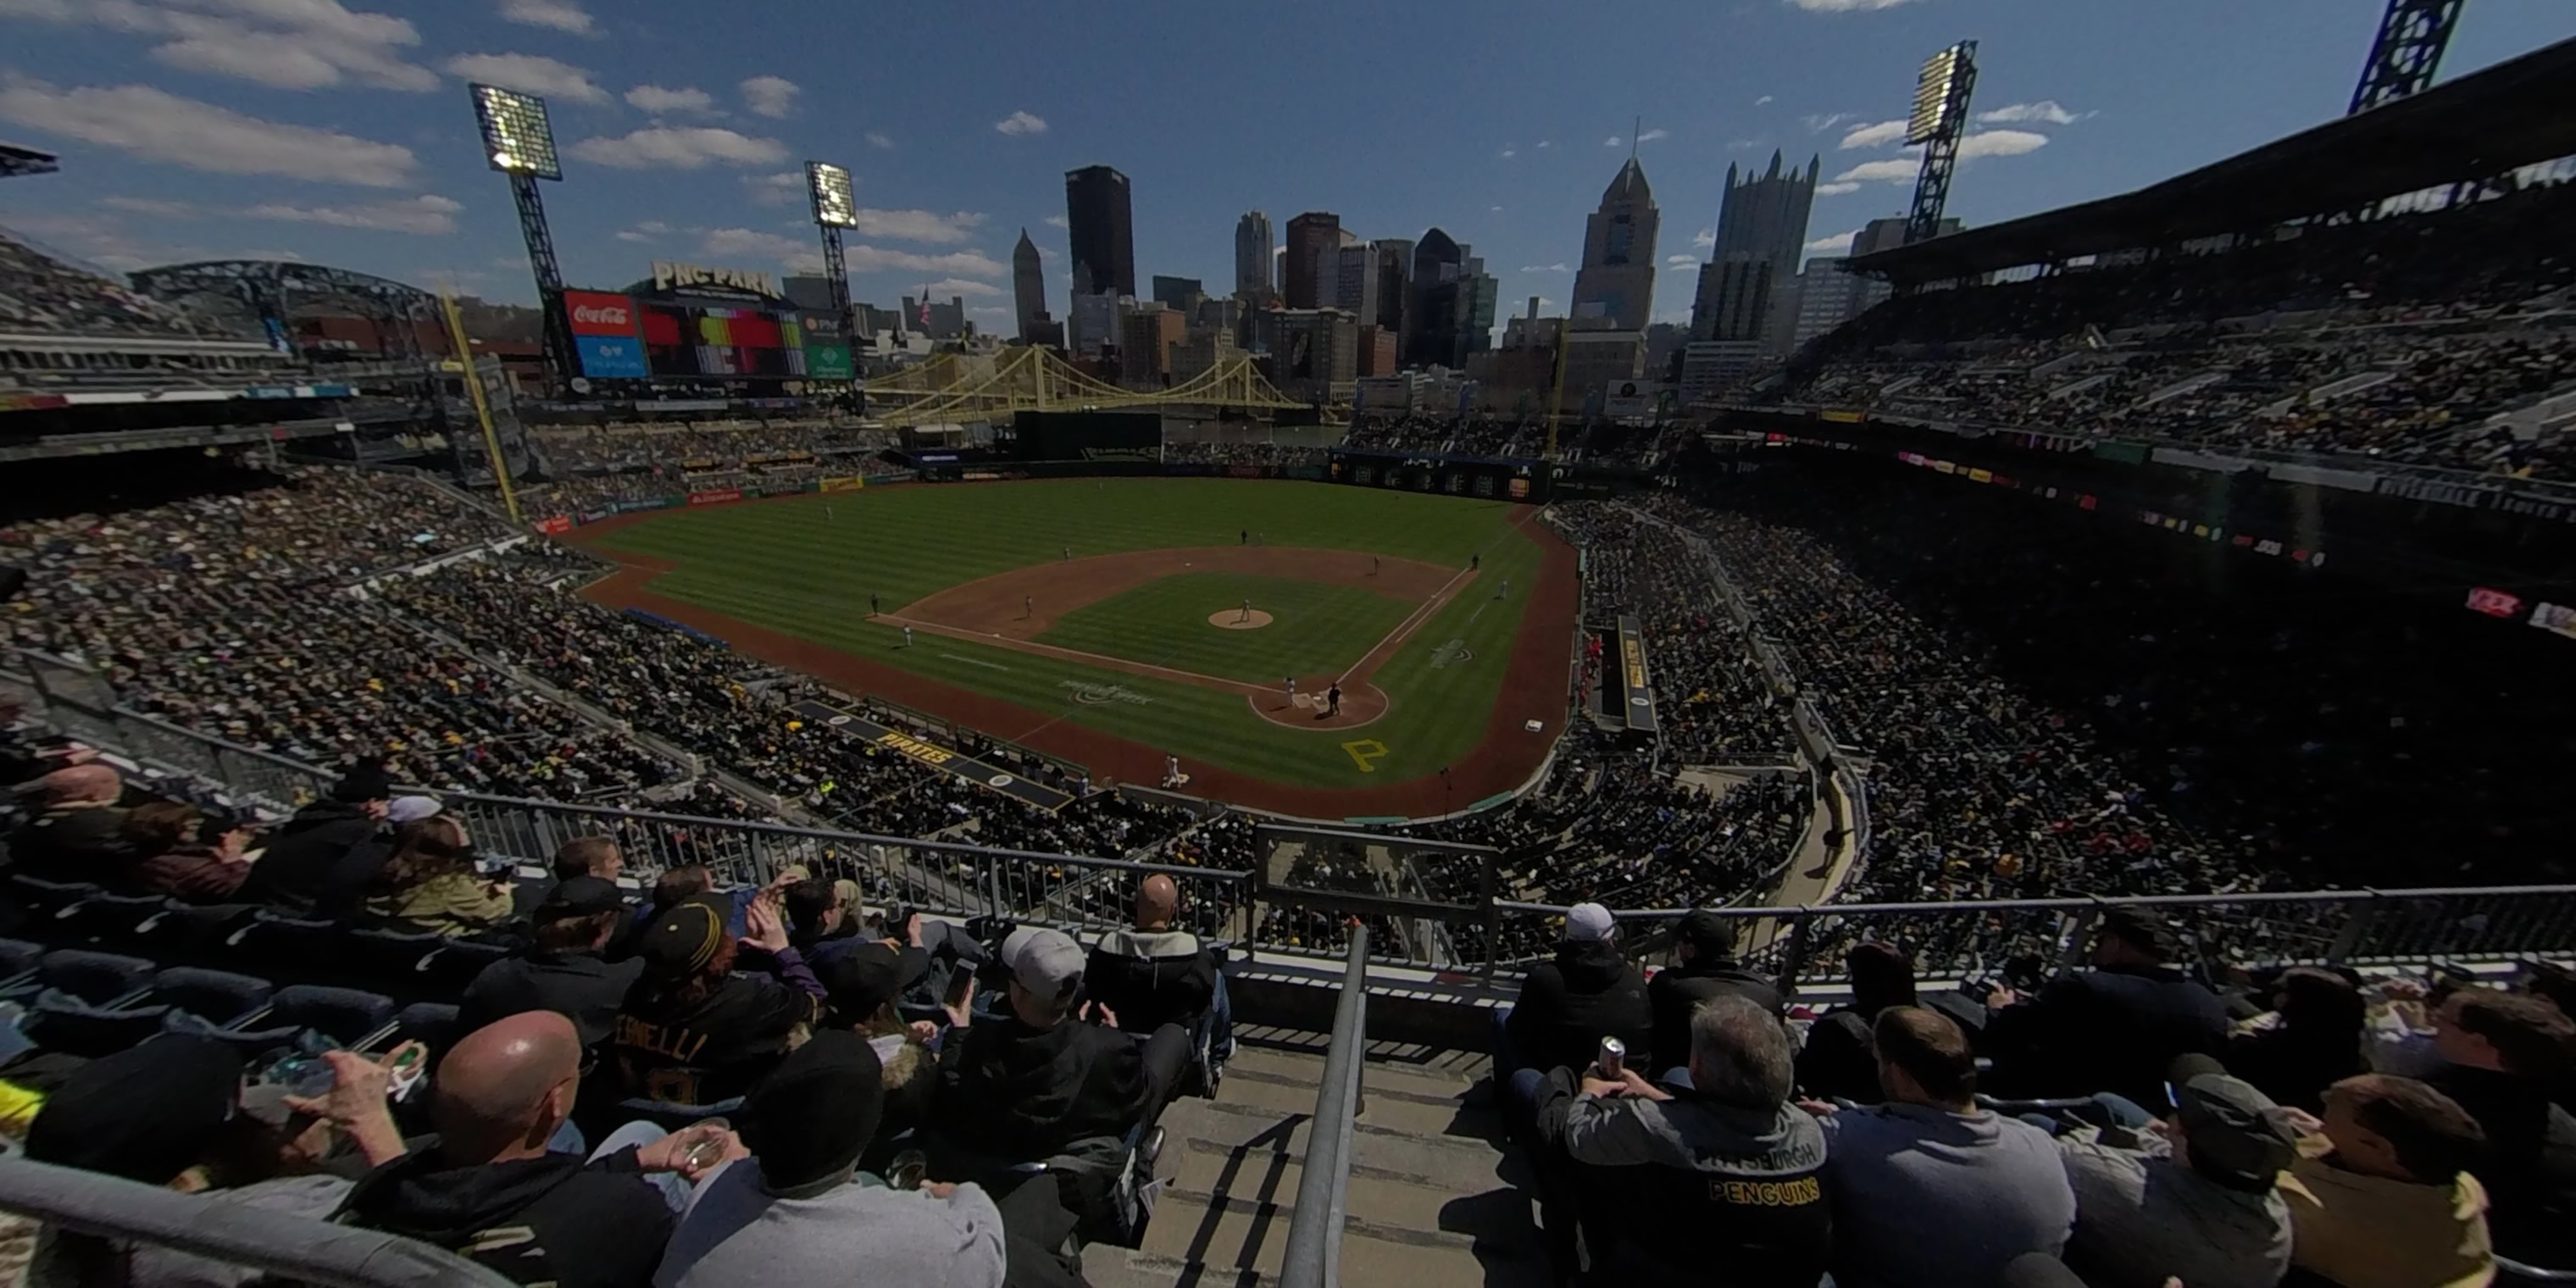 section 217 panoramic seat view  - pnc park